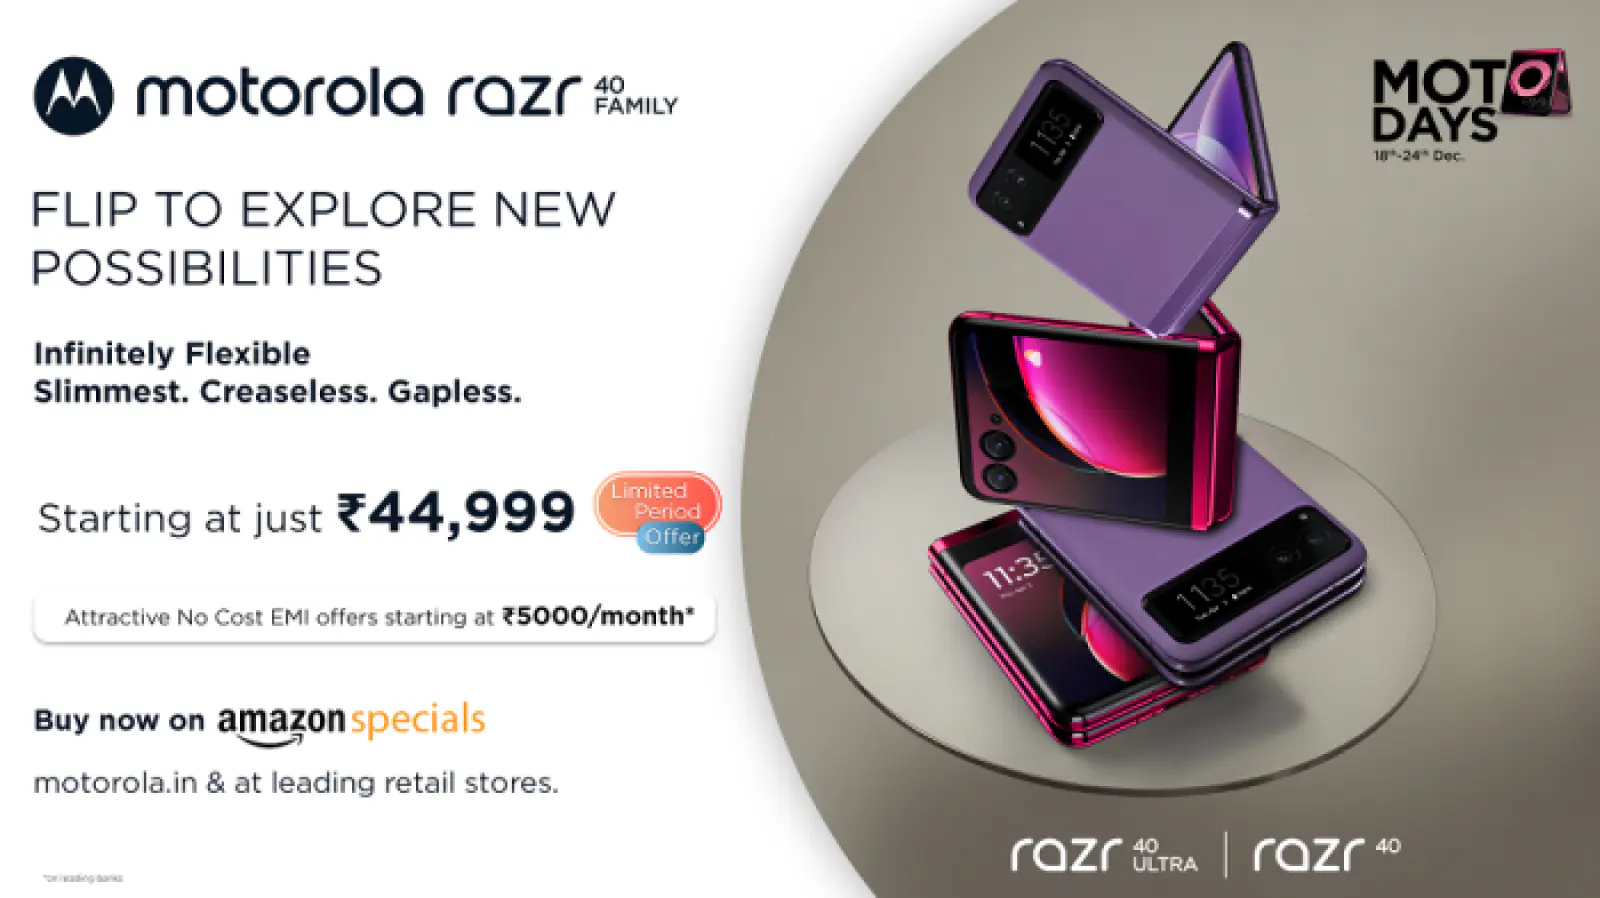 Motorola Unveils Irresistible Price Drops and Exclusive Discounts on Flagship razr40 Ultra and razr40 During Moto Days Promotion